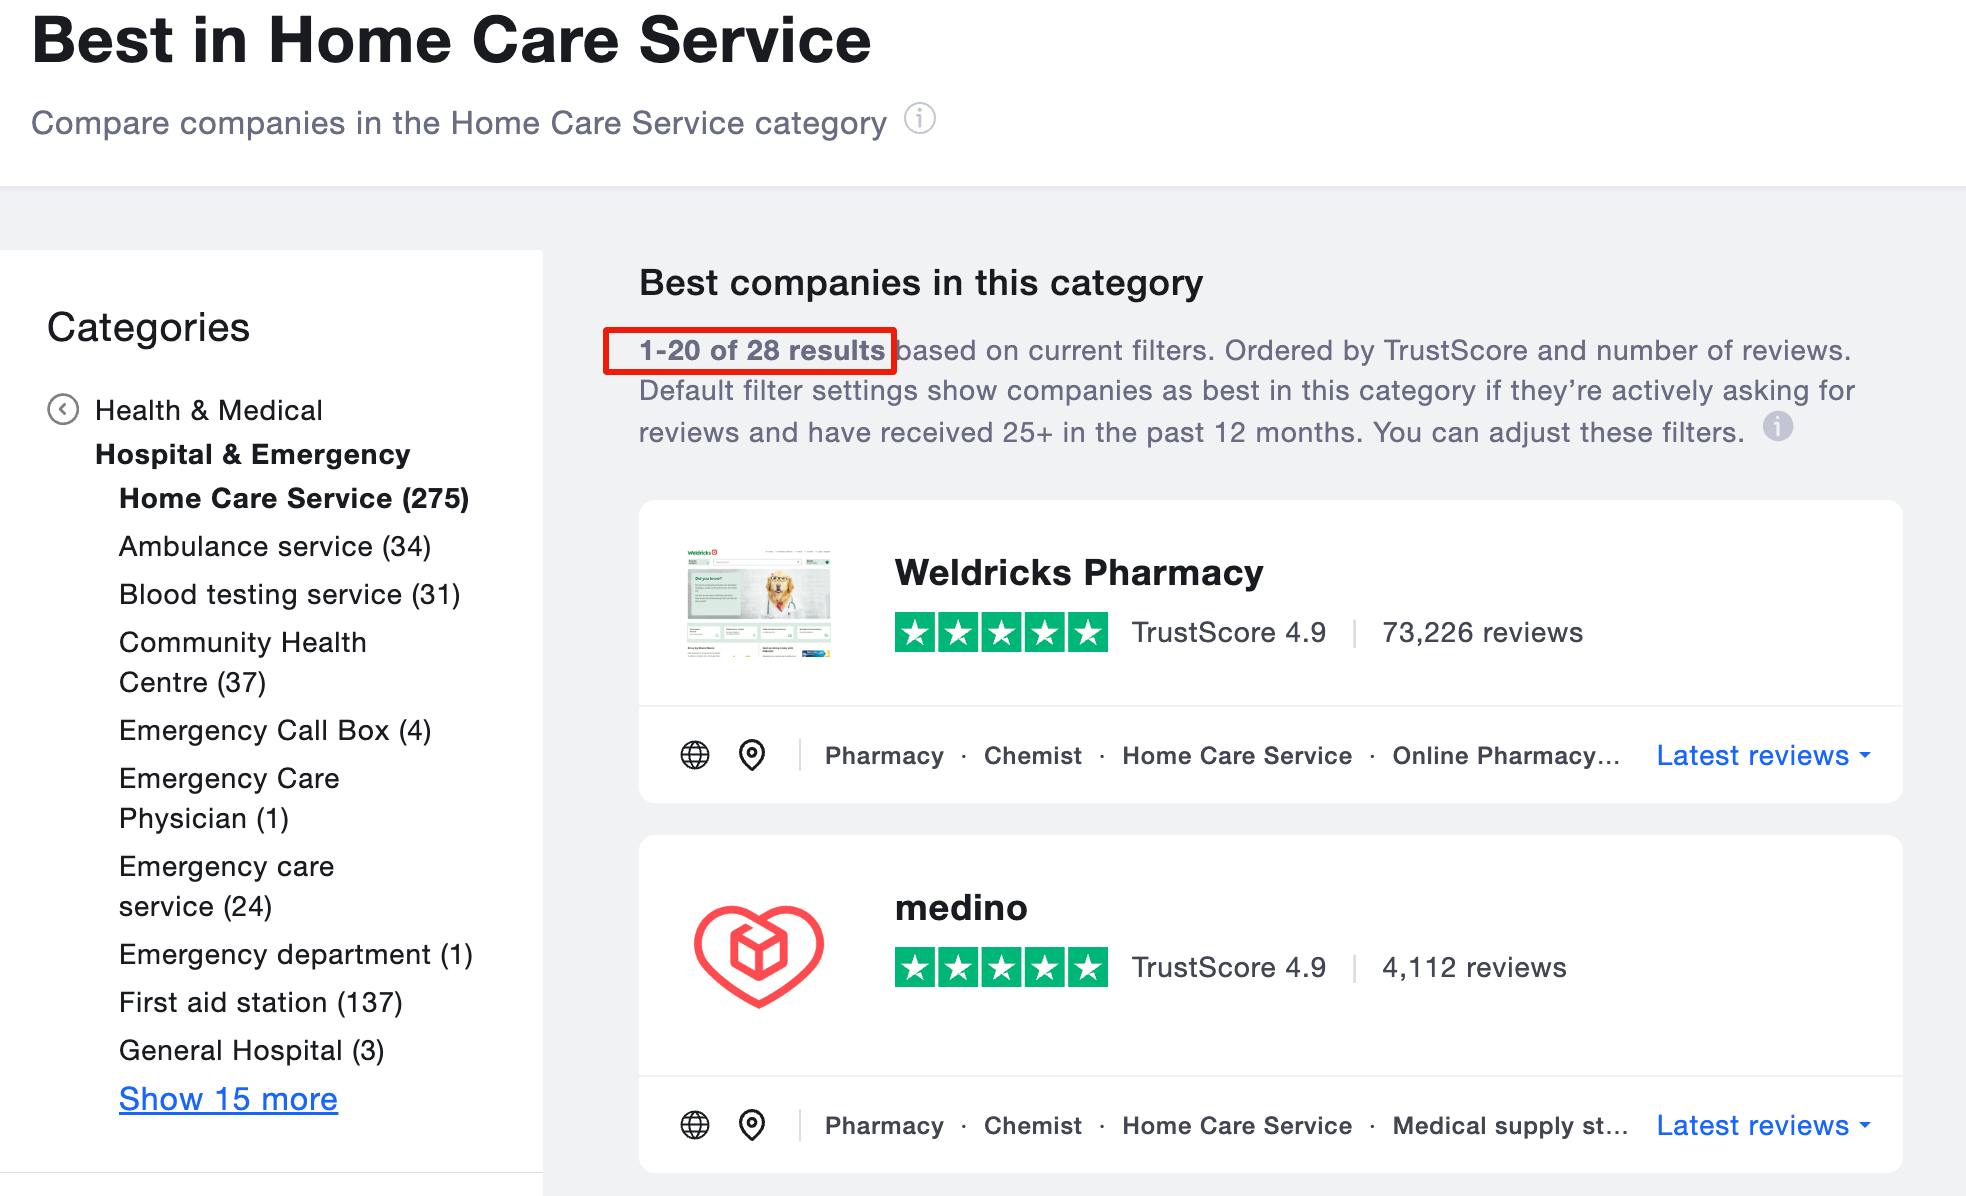 Image of medino ranking position 2 on Trustpilot in the Home Care services category